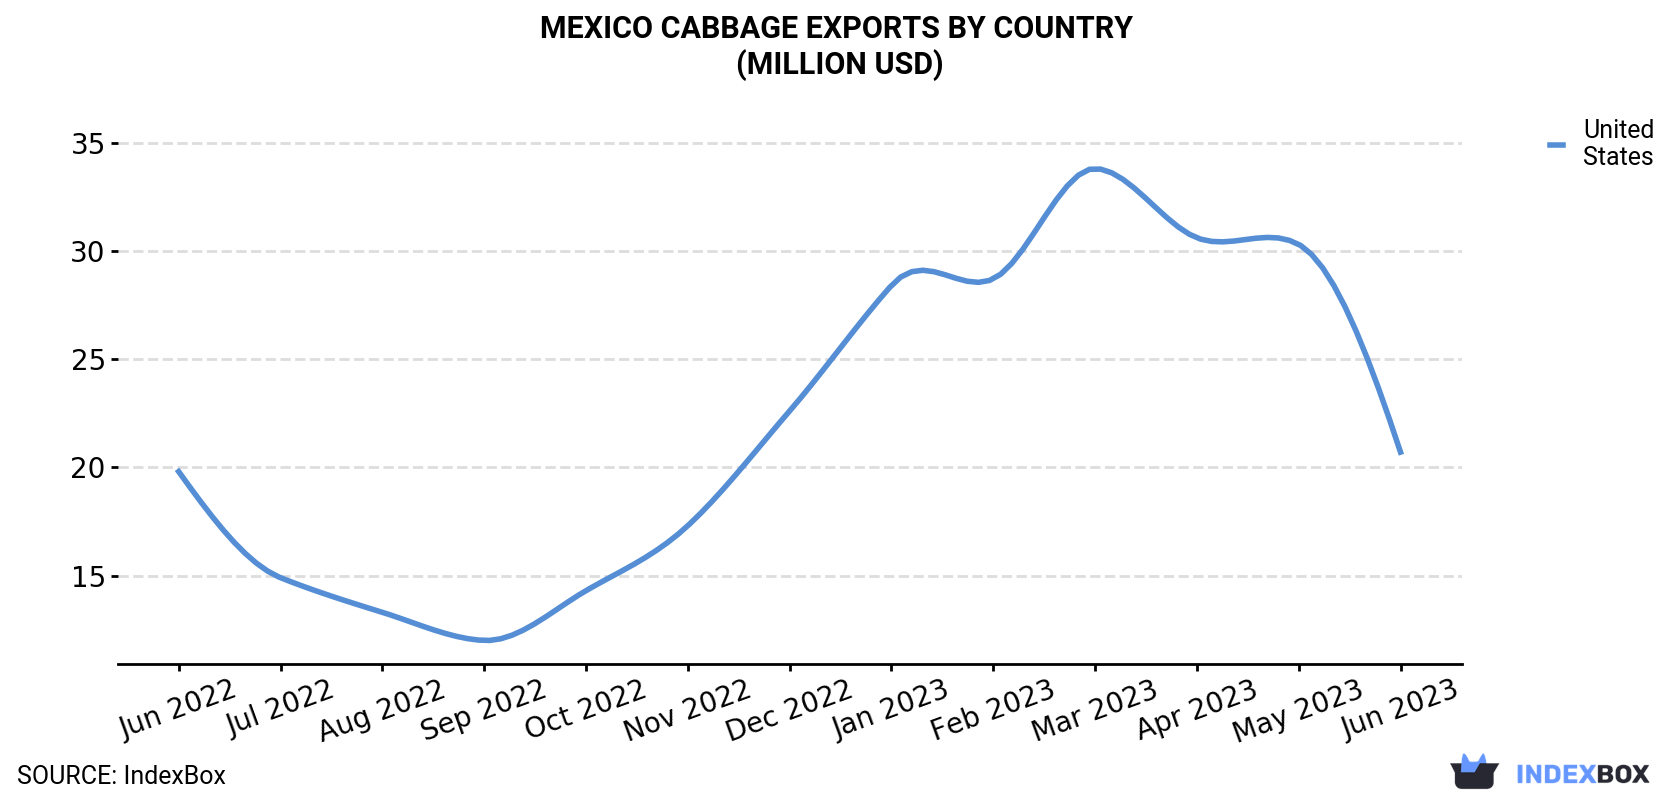 Mexico Cabbage Exports By Country (Million USD)